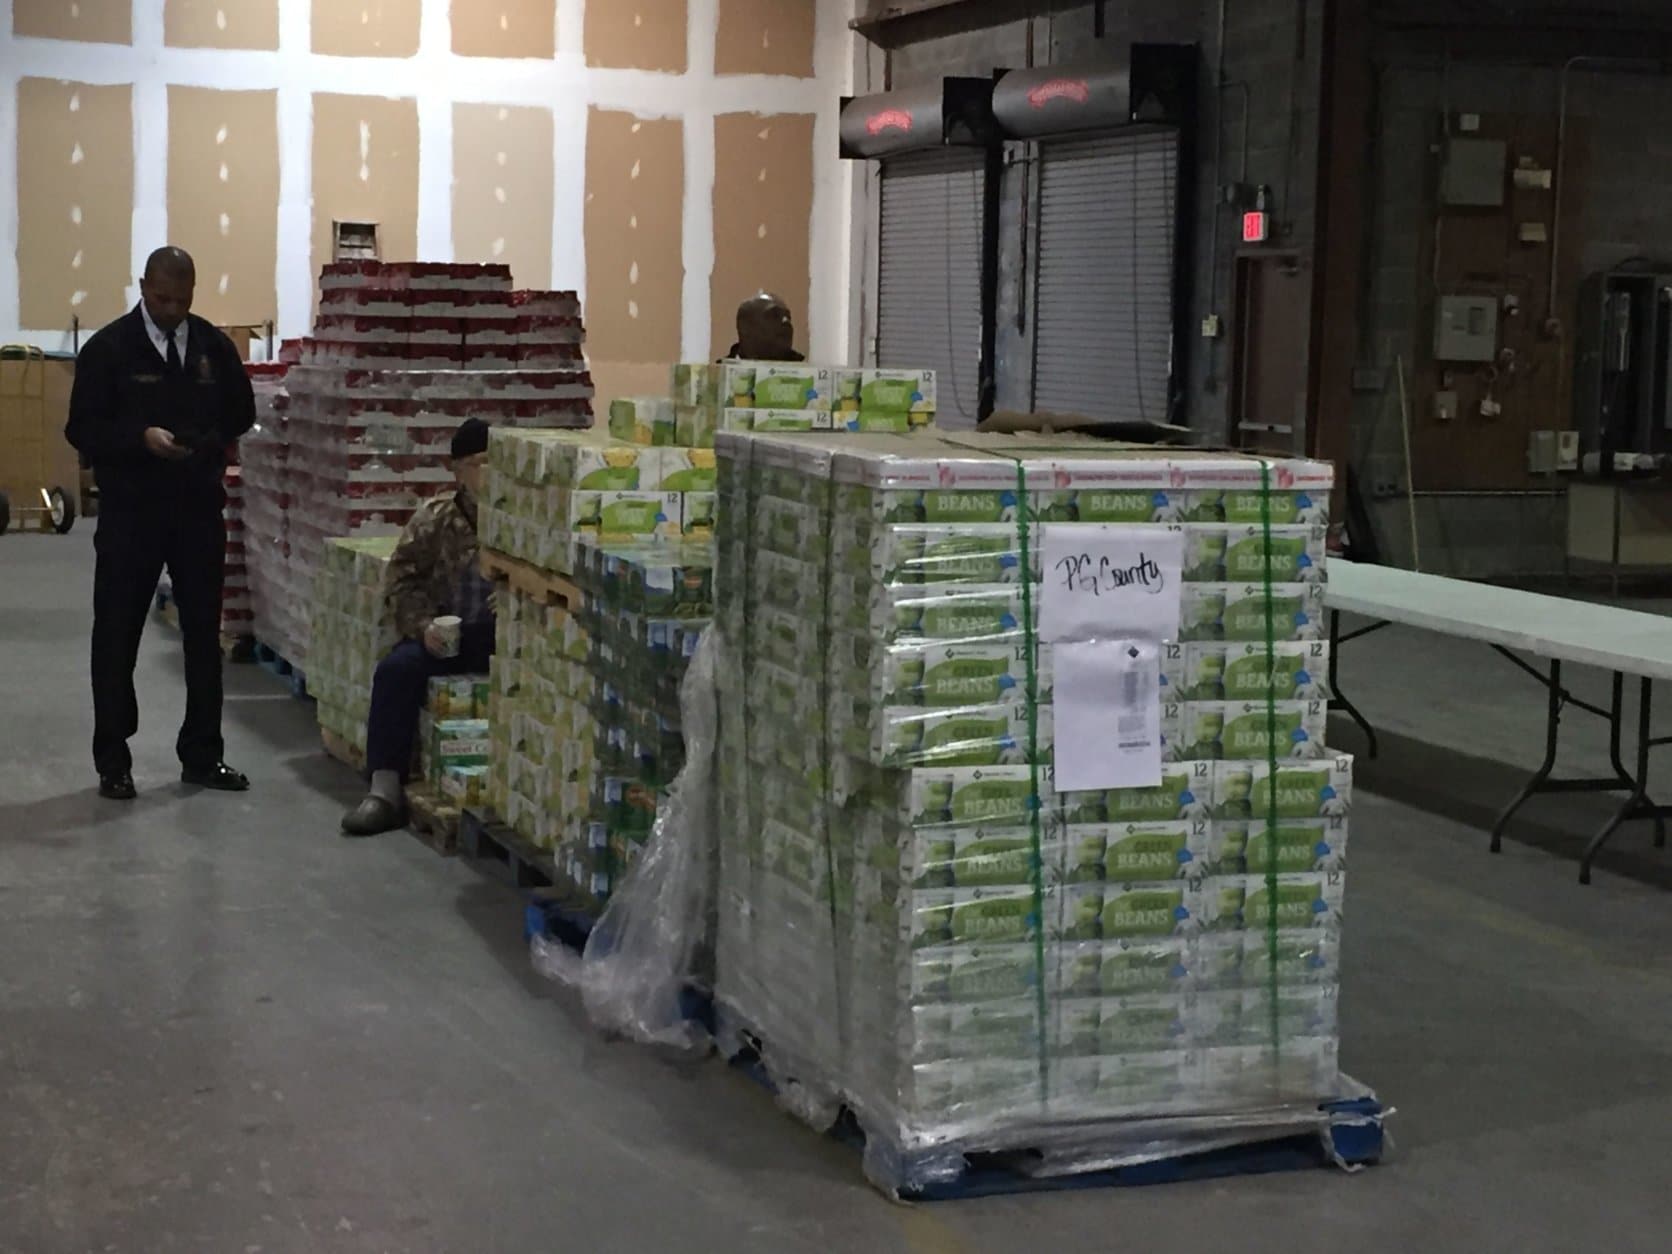 The food donated today, stacked several pallets high, is being distributed to more than a dozen food pantries around Prince George’s County, which will then work with furloughed feds who have reached out for help to make sure they can eat. (WTOP/John Domen)